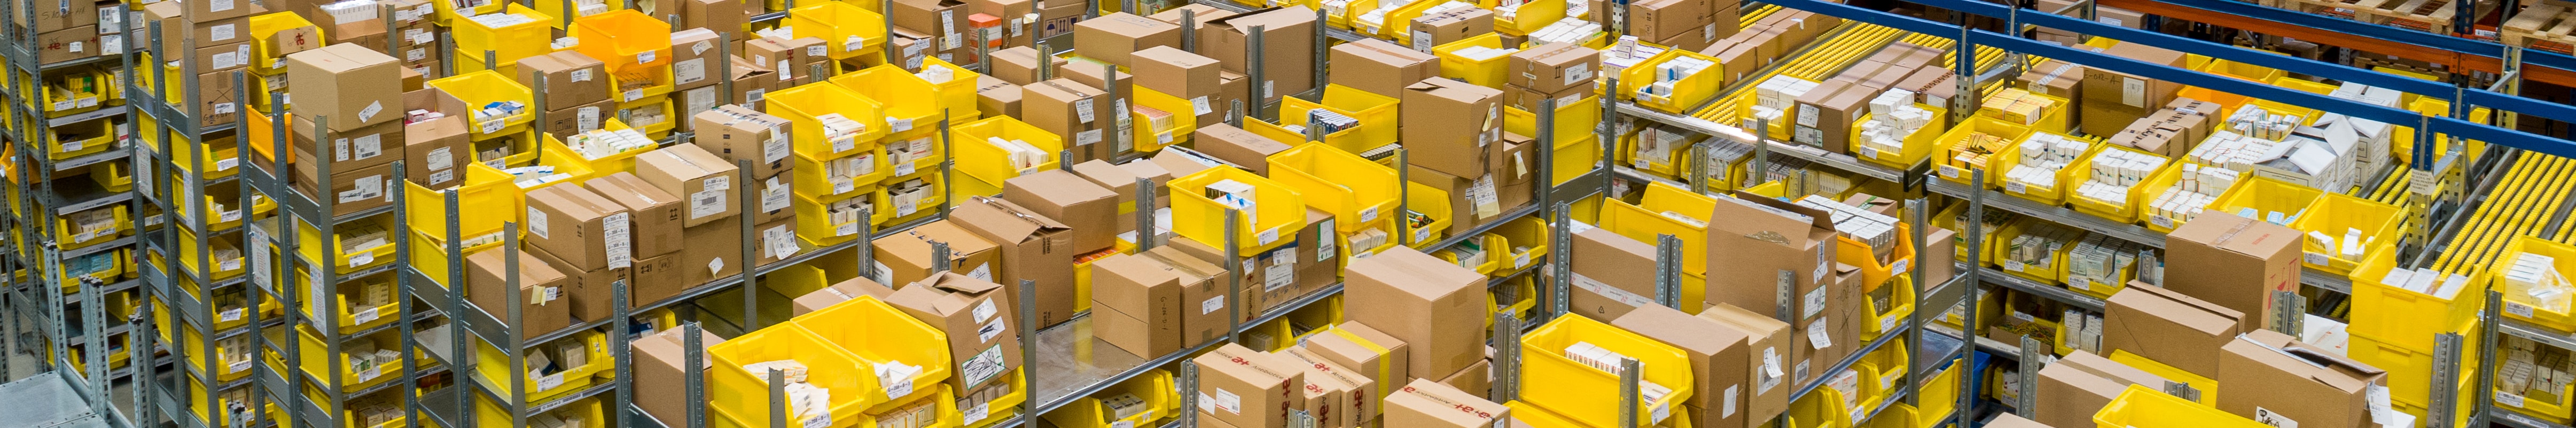 Amazon provides e-commerce services to its 300 million active customers